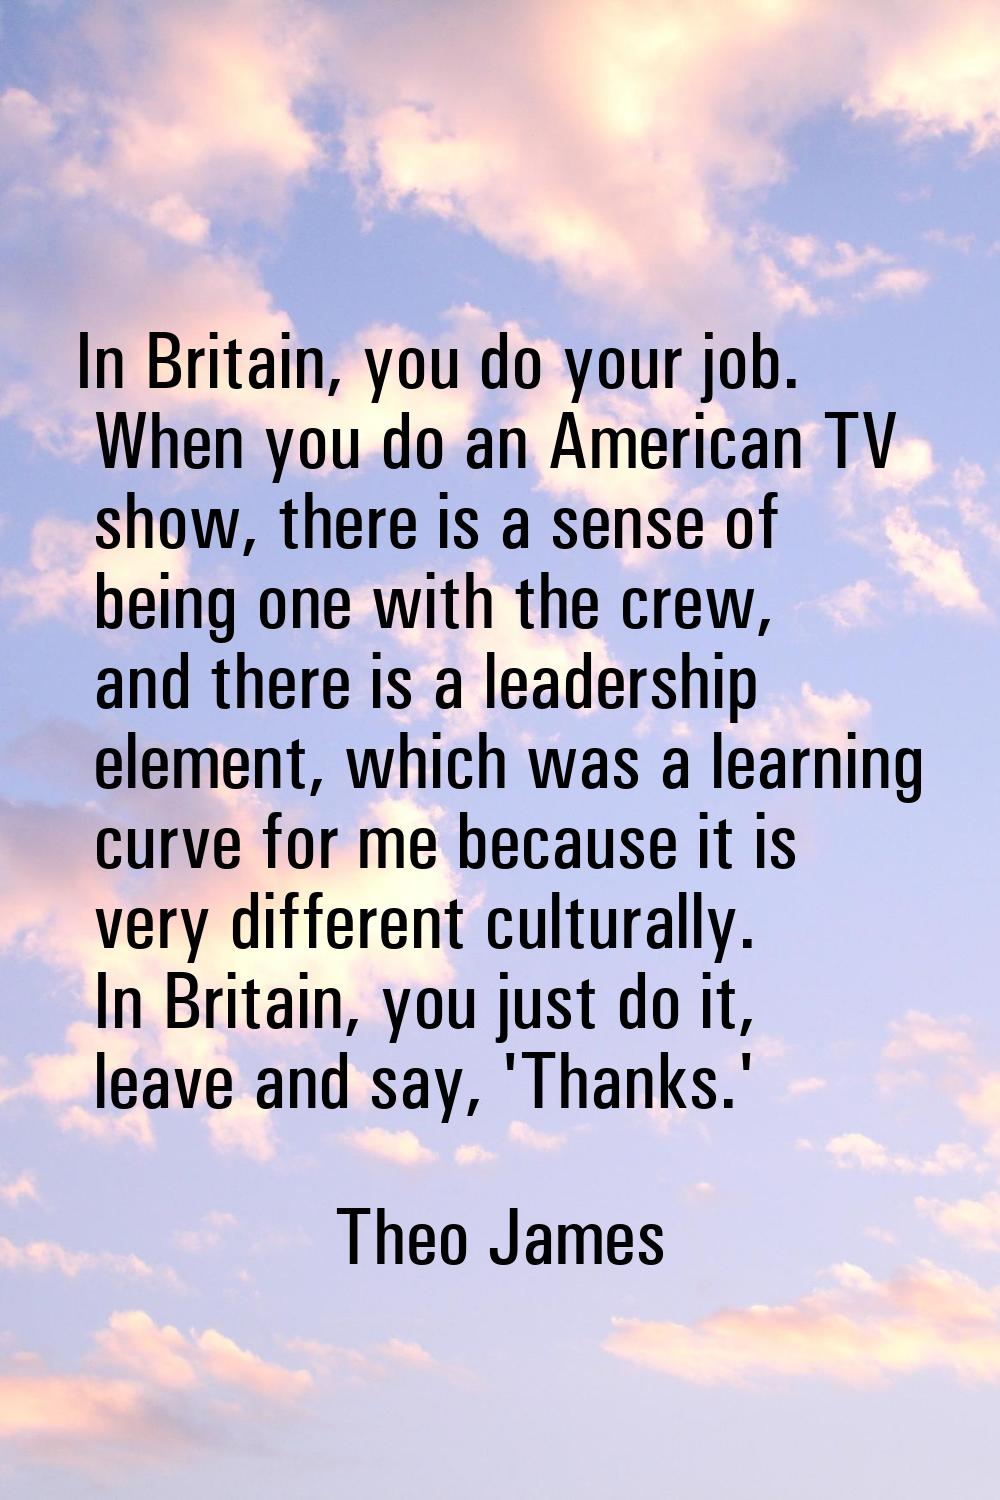 In Britain, you do your job. When you do an American TV show, there is a sense of being one with th